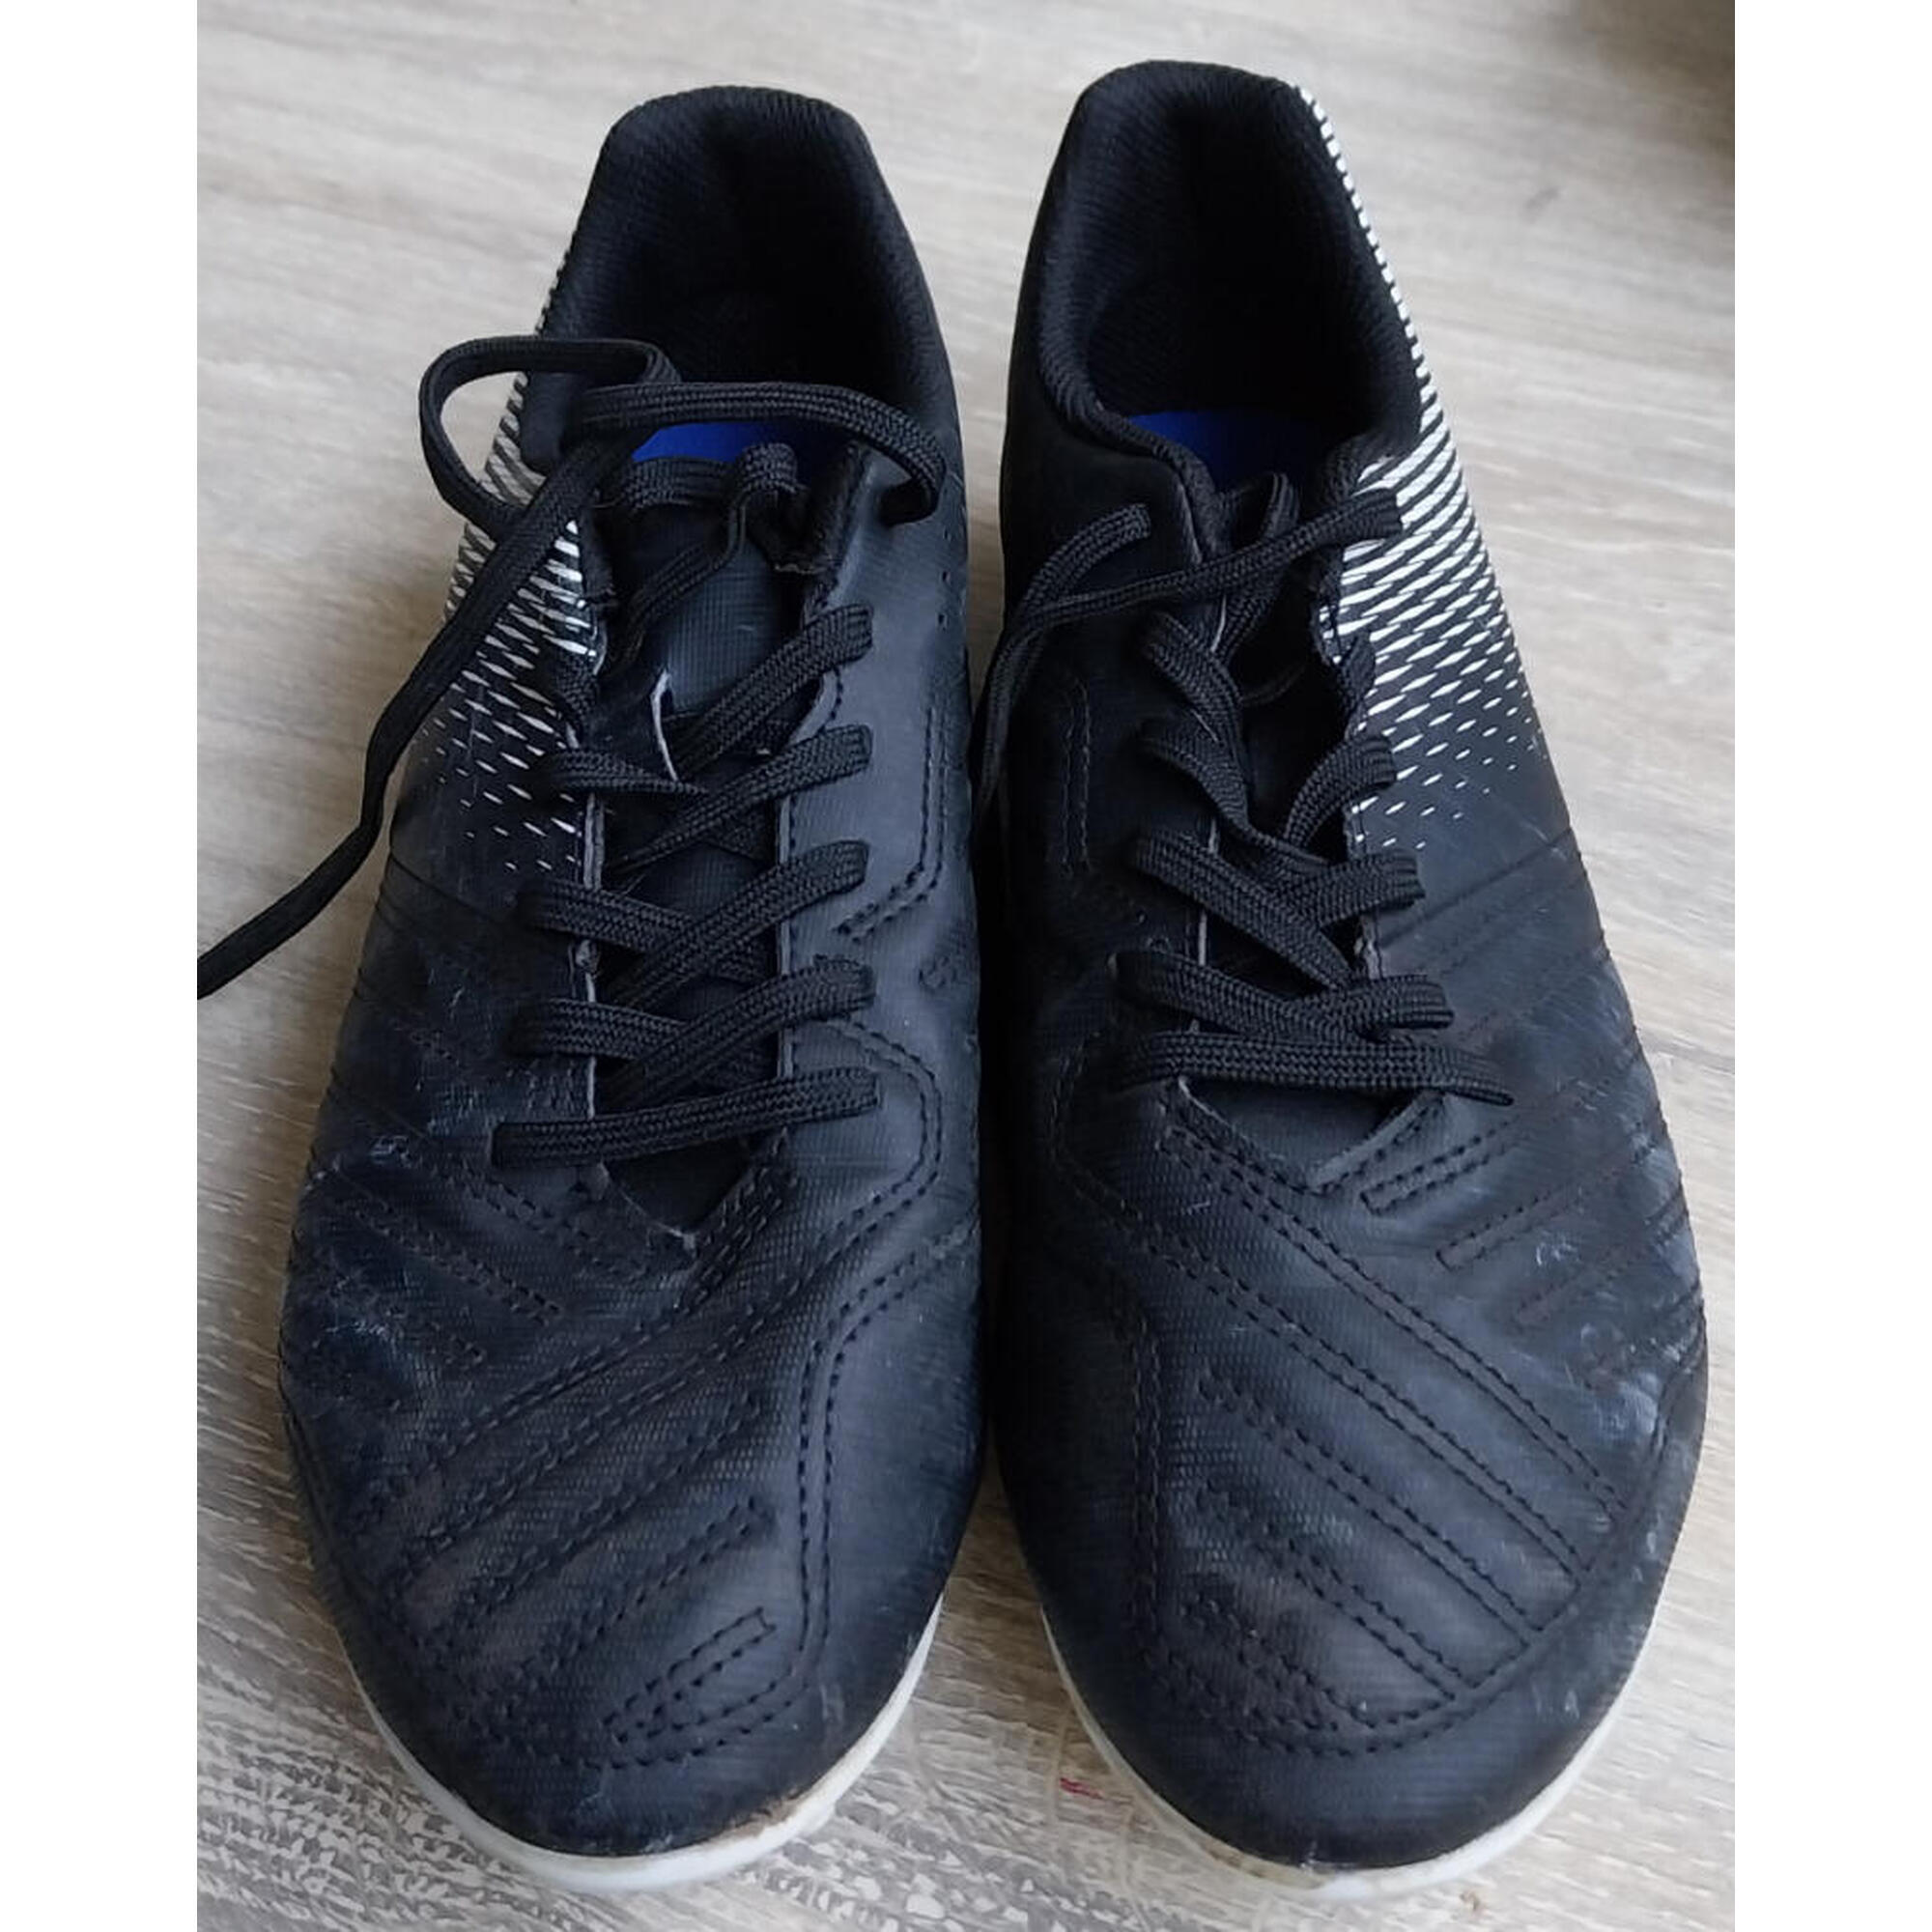 C2C - Chaussures de football taille 38